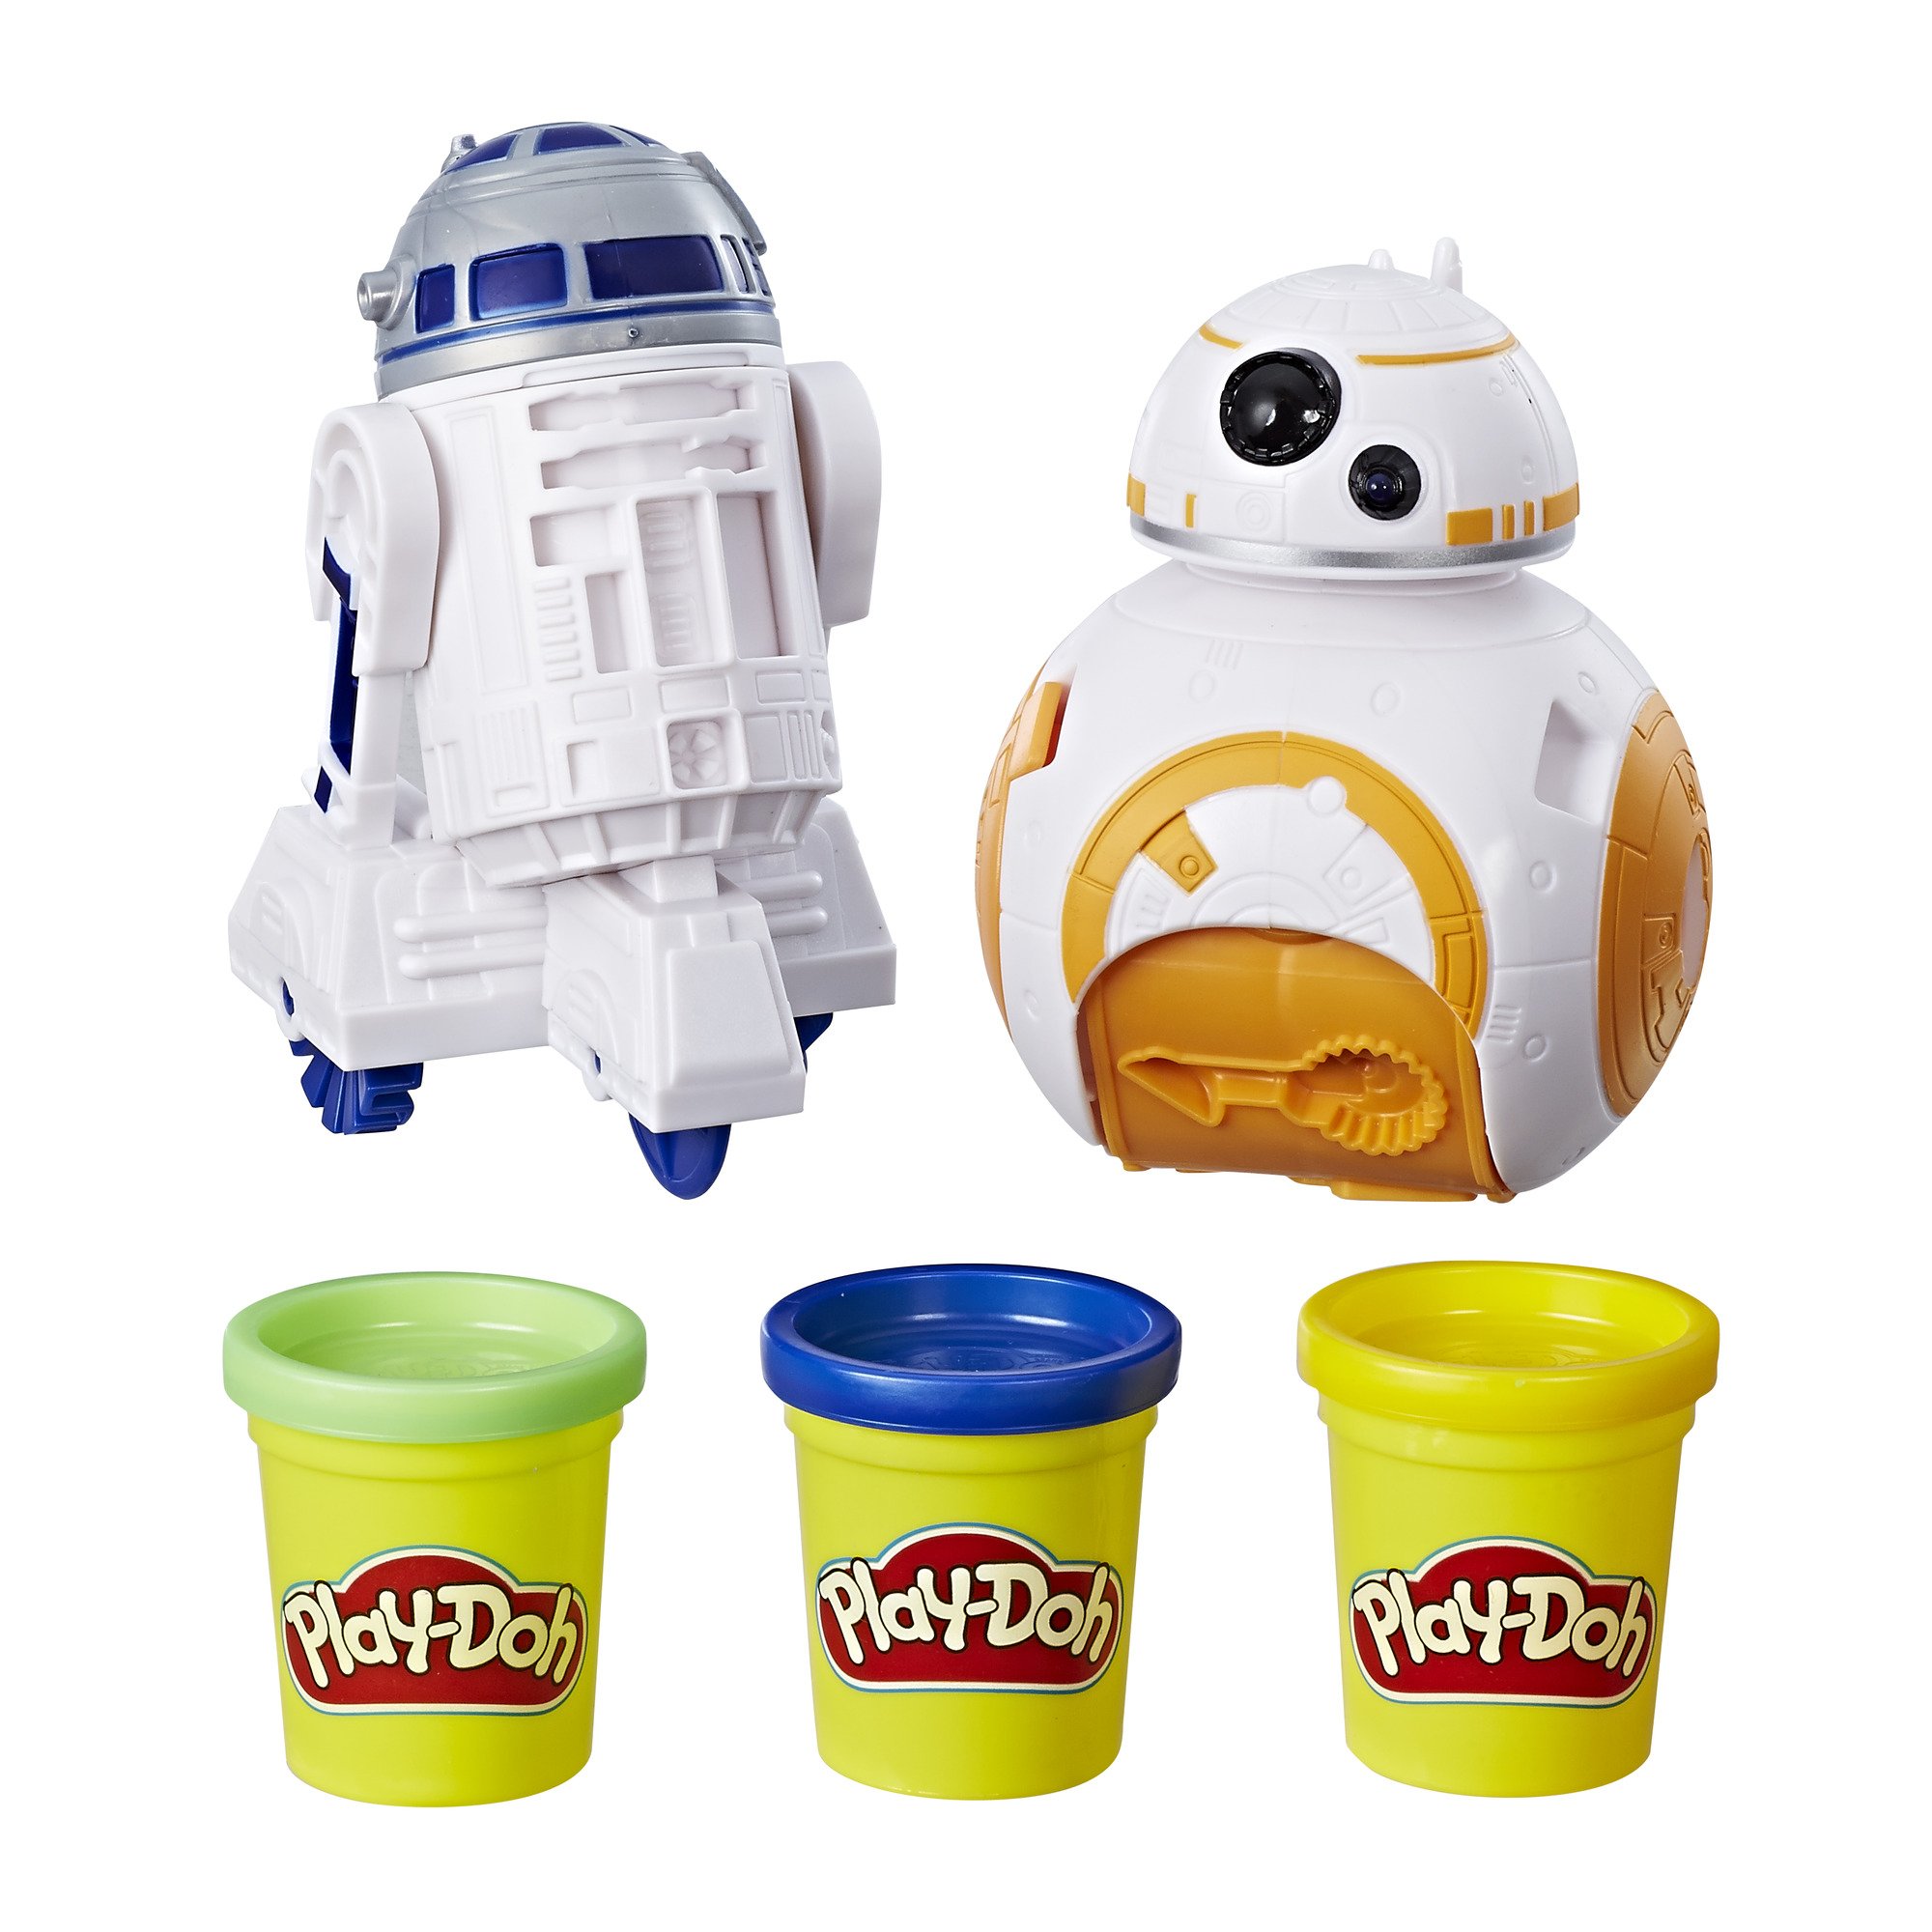 Play-Doh Star Wars BB-8 and R2-D2 (Amazon Exclusive)